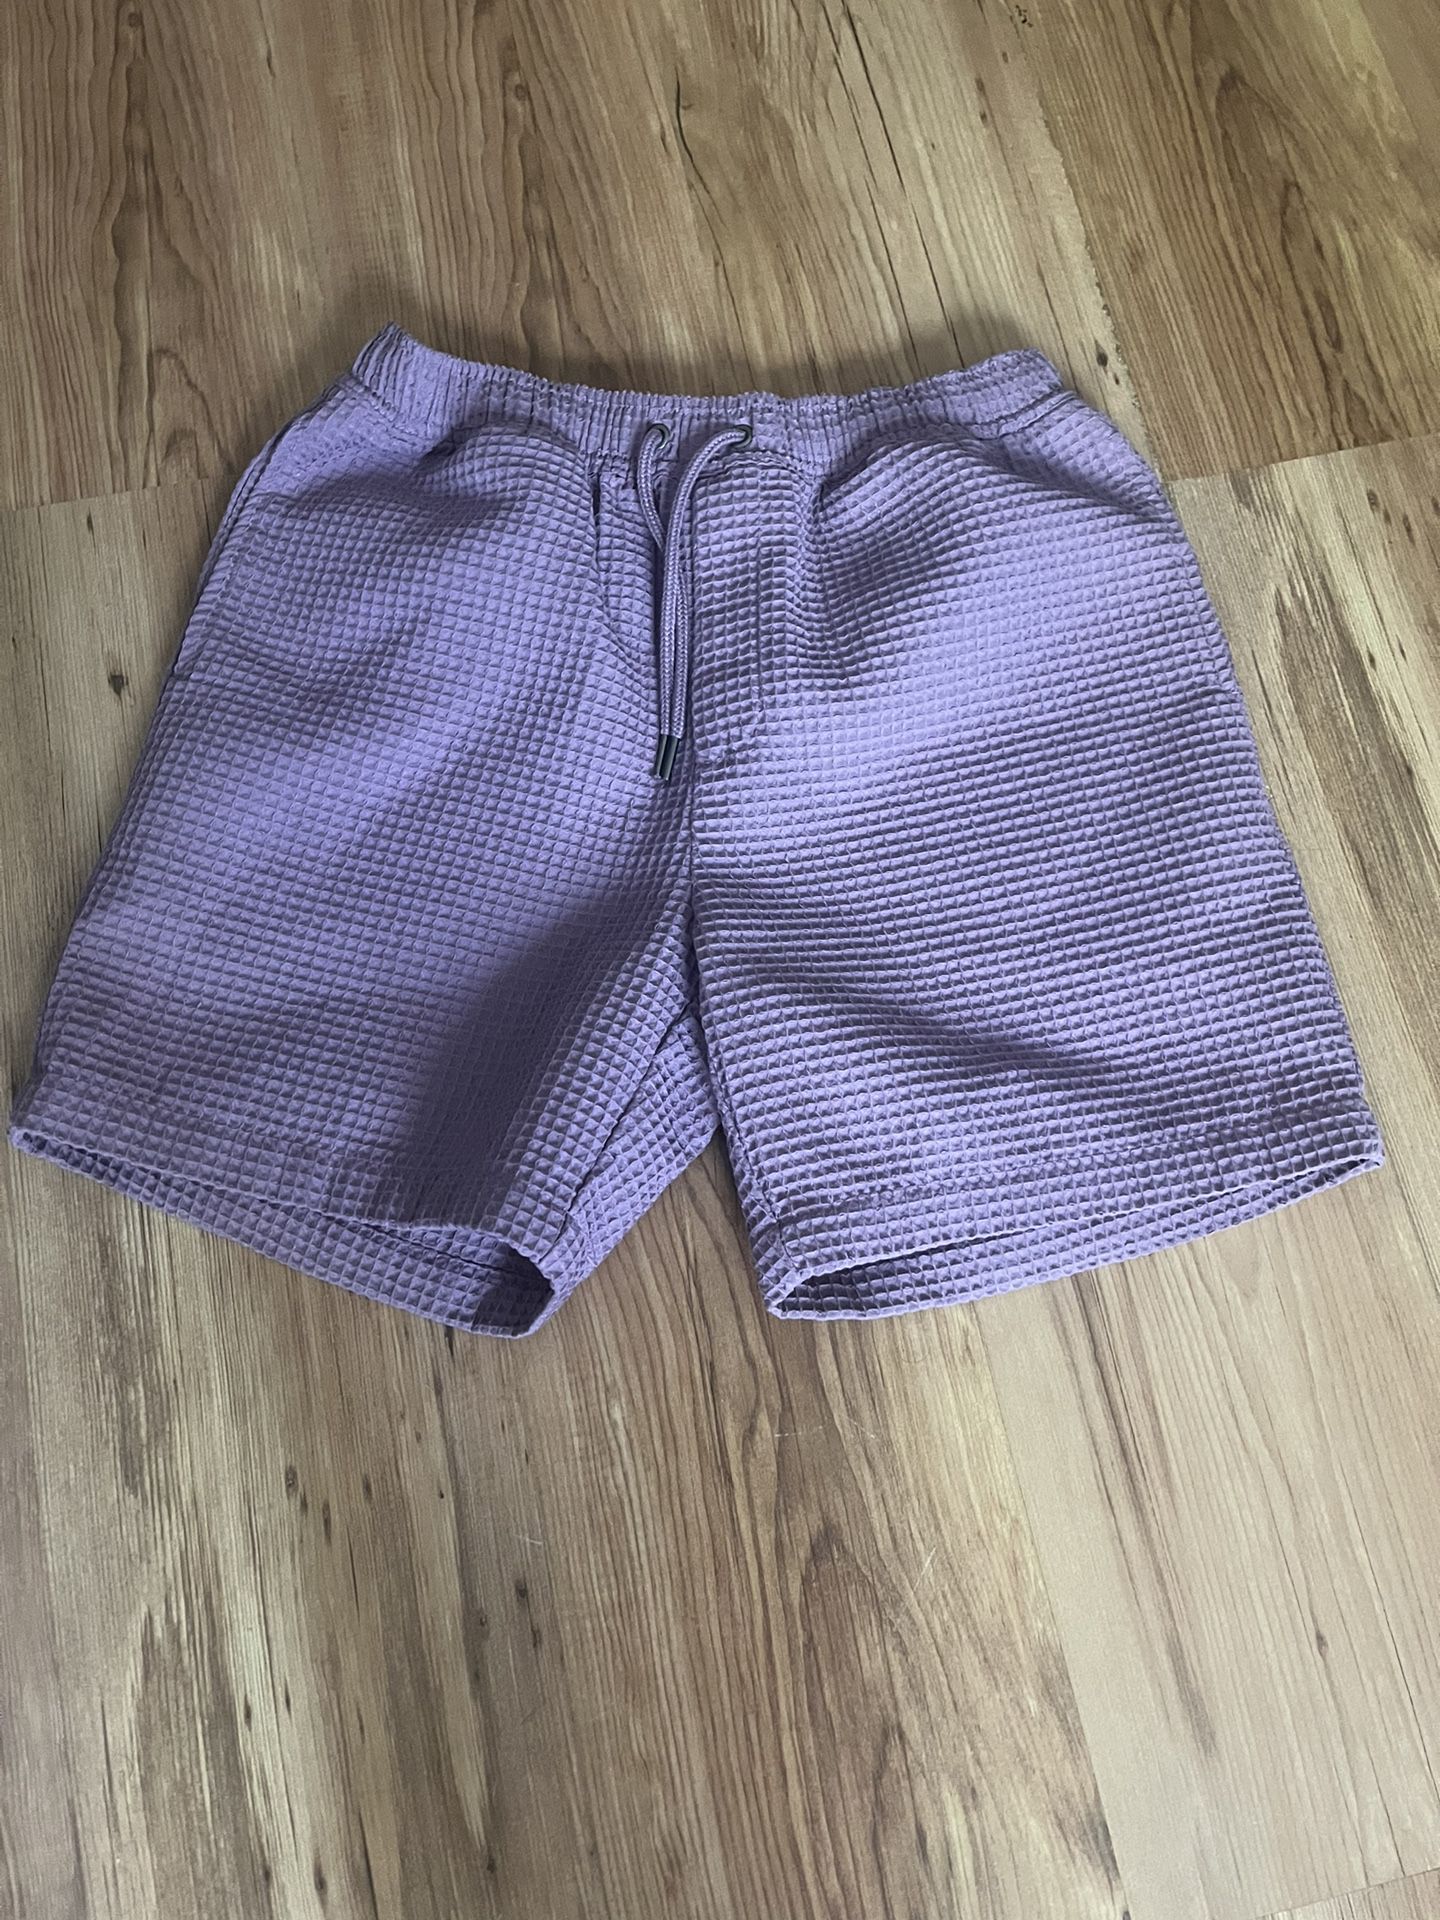 Men’s Small Negative Space Shorts